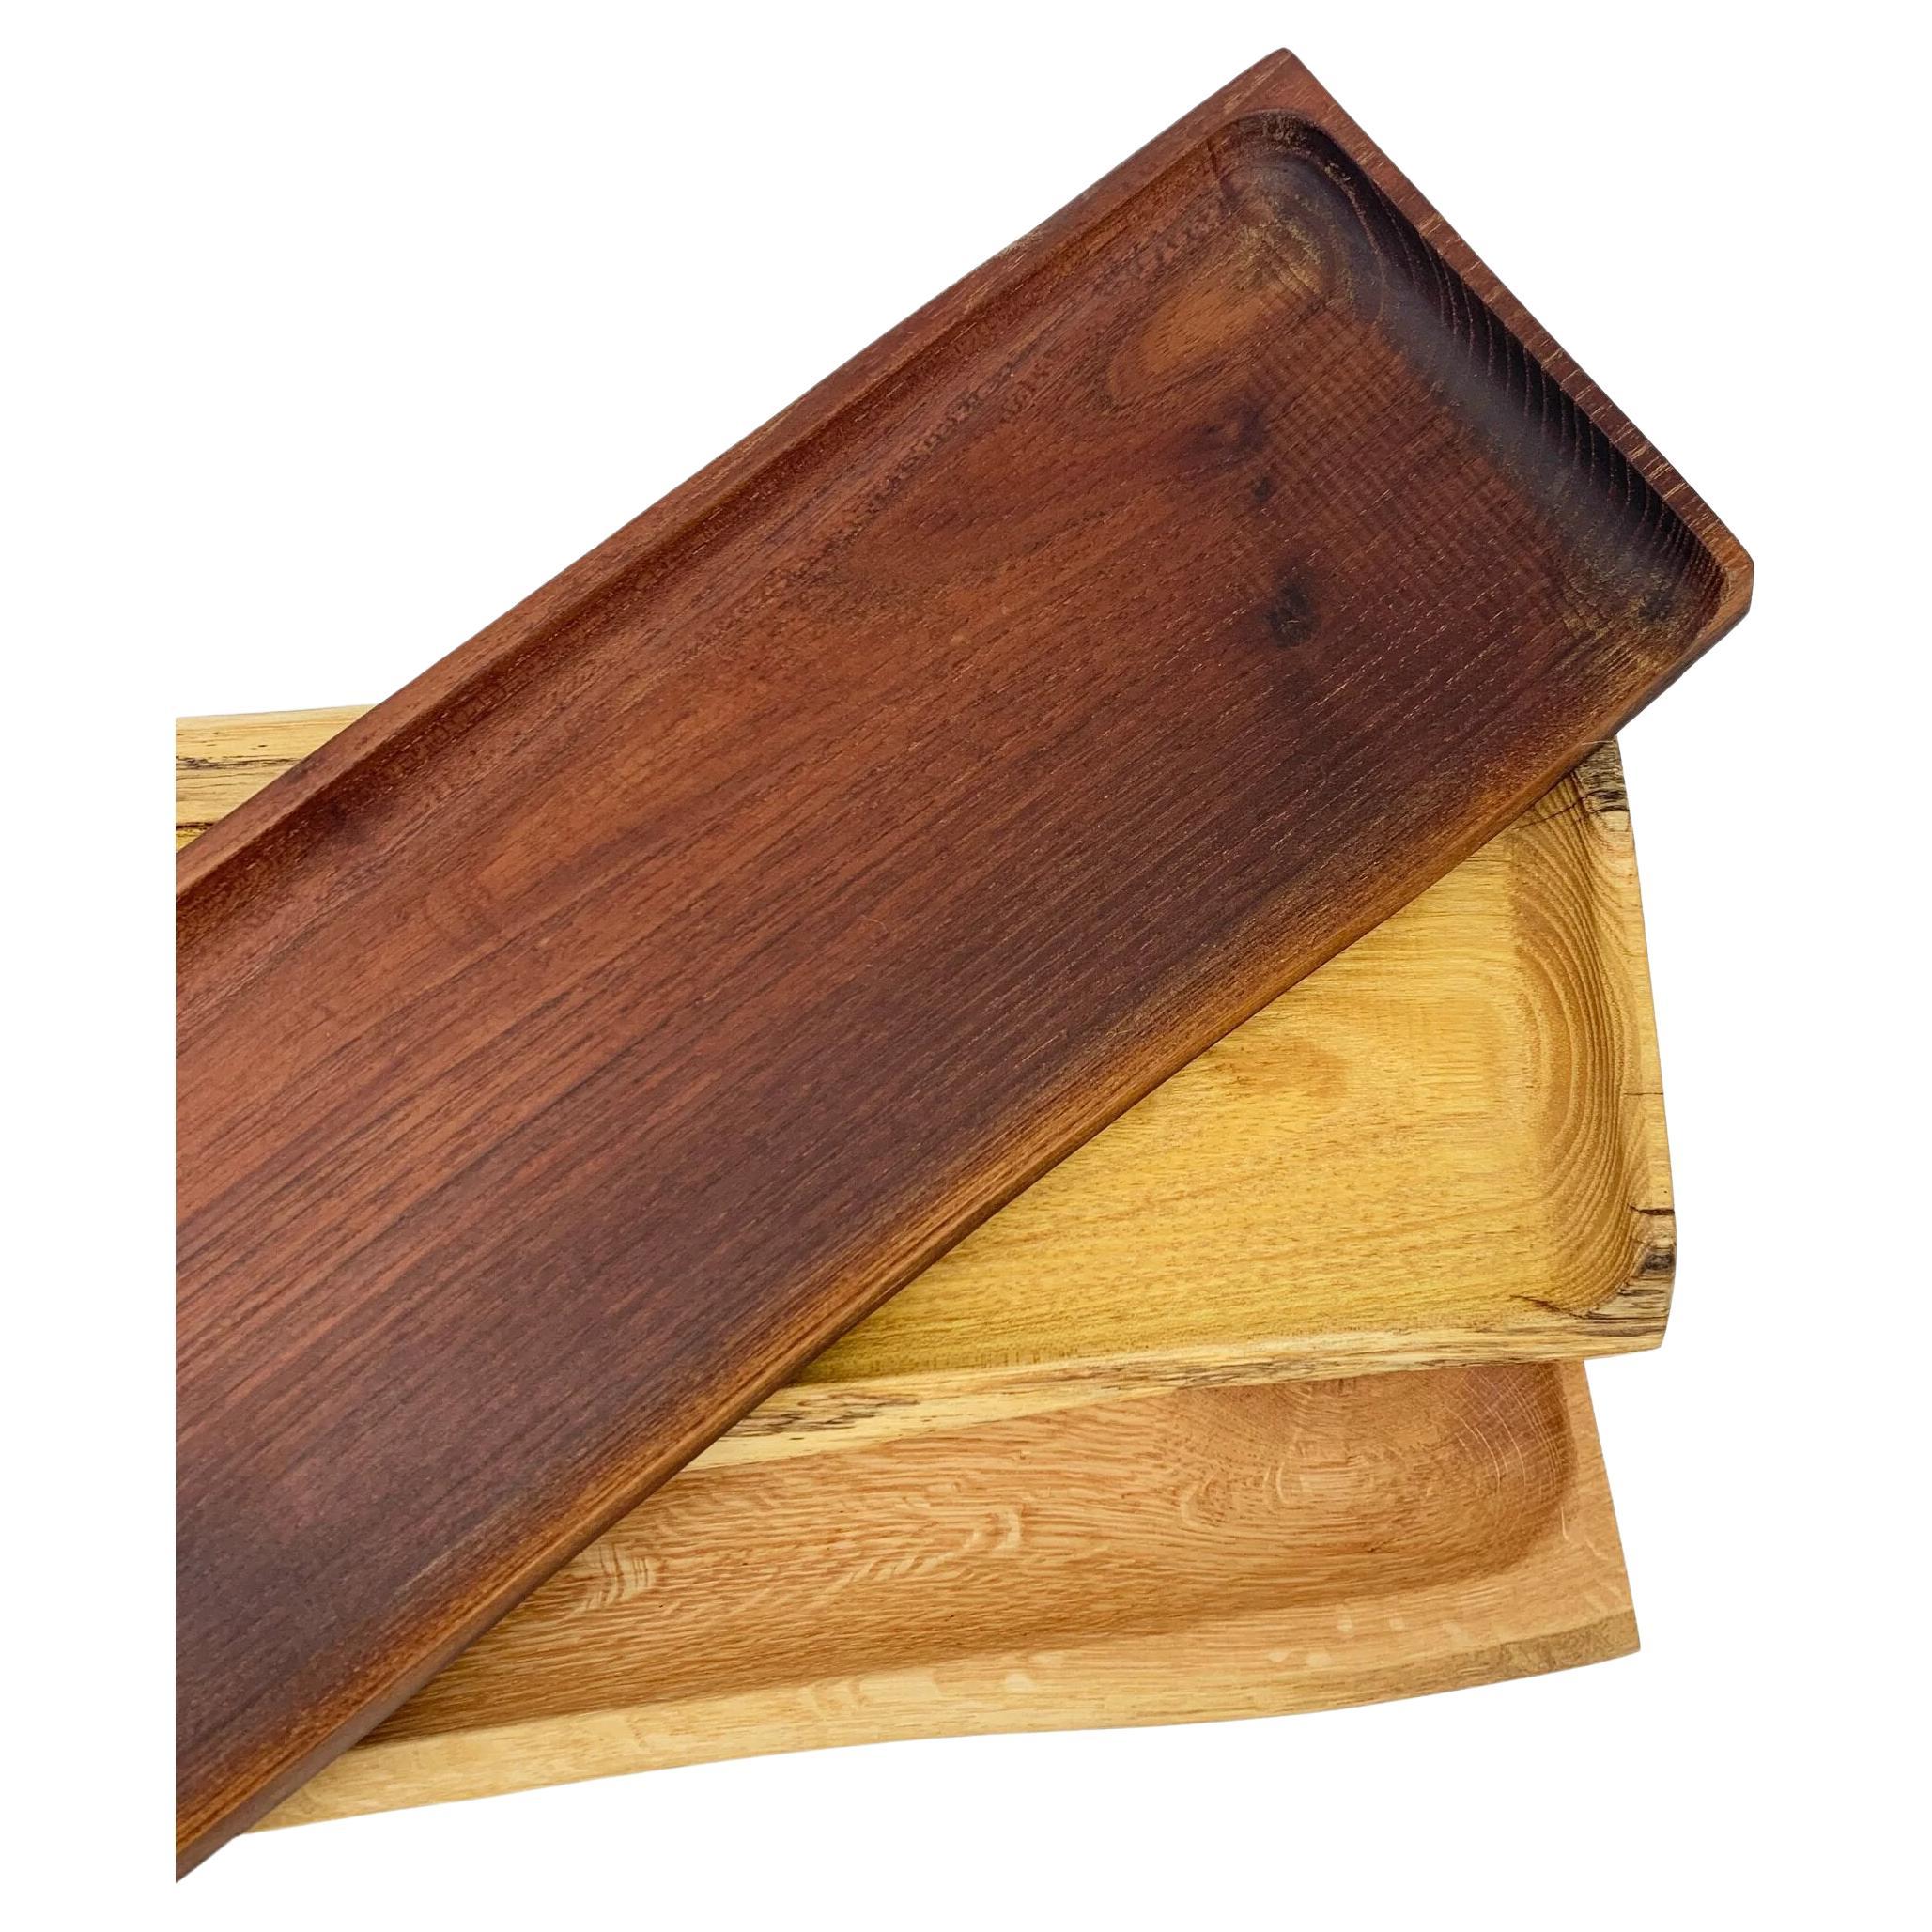 The Trunk Platter is a unique serving board crafted beautifully. With a beautiful natural grain, it brings a touch of nature to any home. Sturdy and durable, it can be easily washed with water and coated with olive oil. Serve up style with this